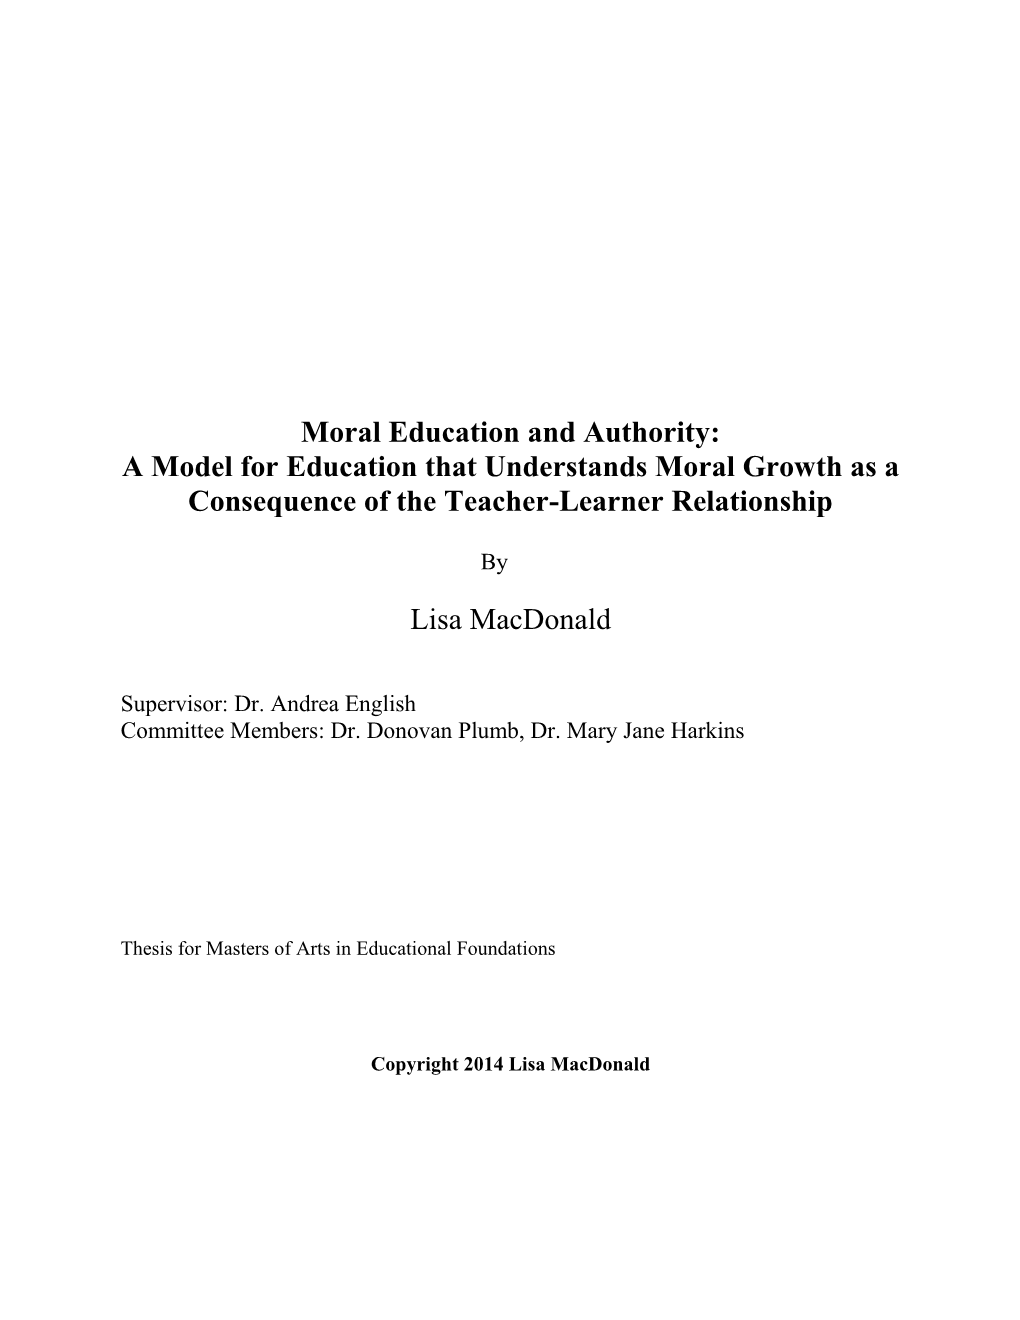 Moral Education and Authority: a Model for Education That Understands Moral Growth As a Consequence of the Teacher-Learner Relationship